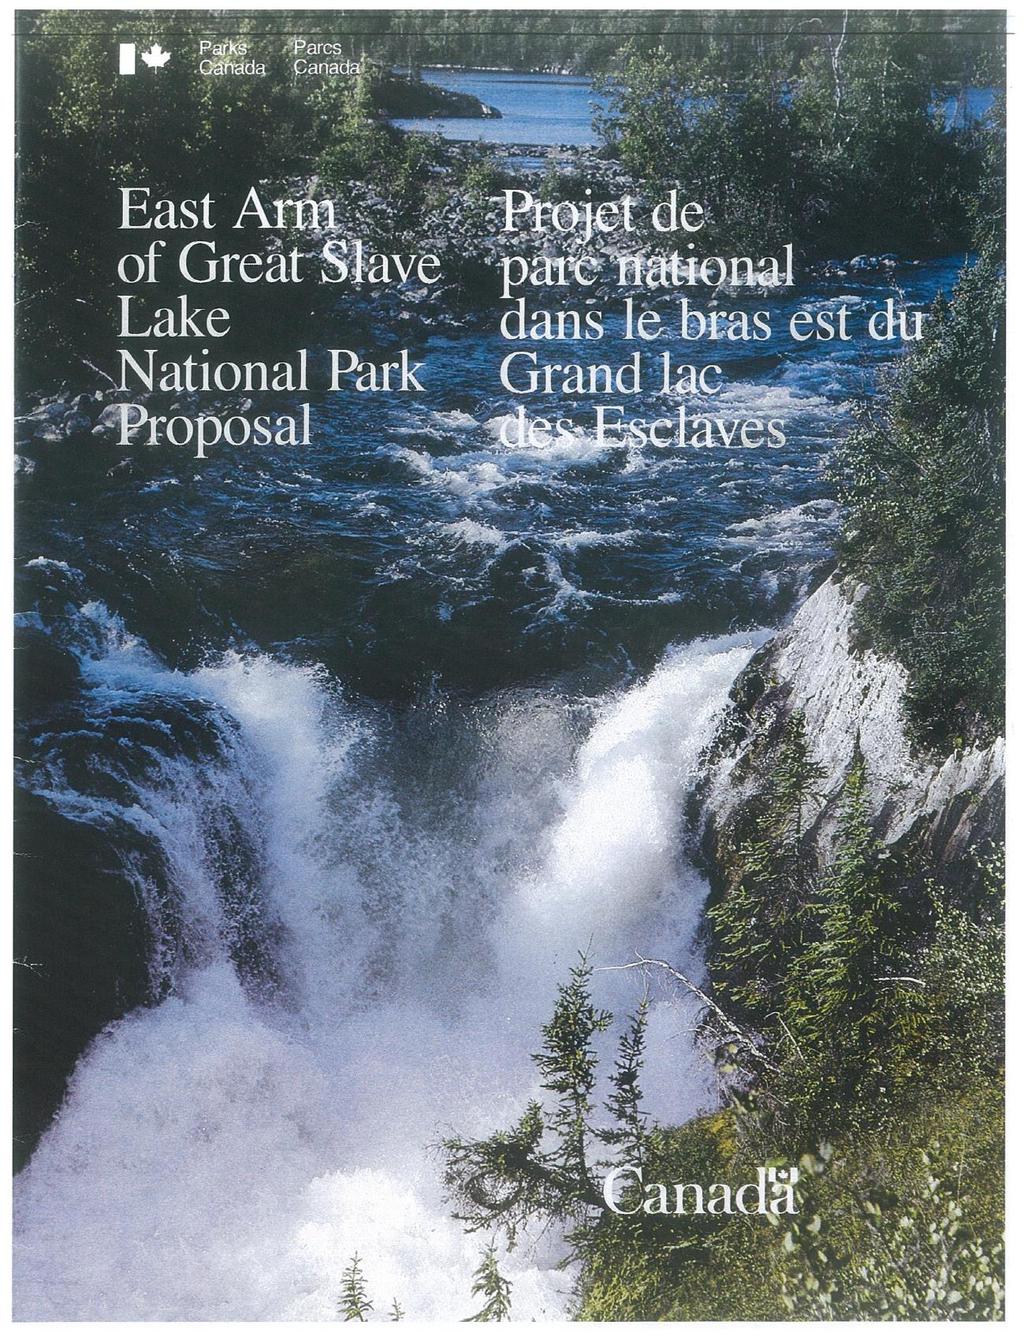 Schedule D Parks Canada 1985/86 proposal, boundary map